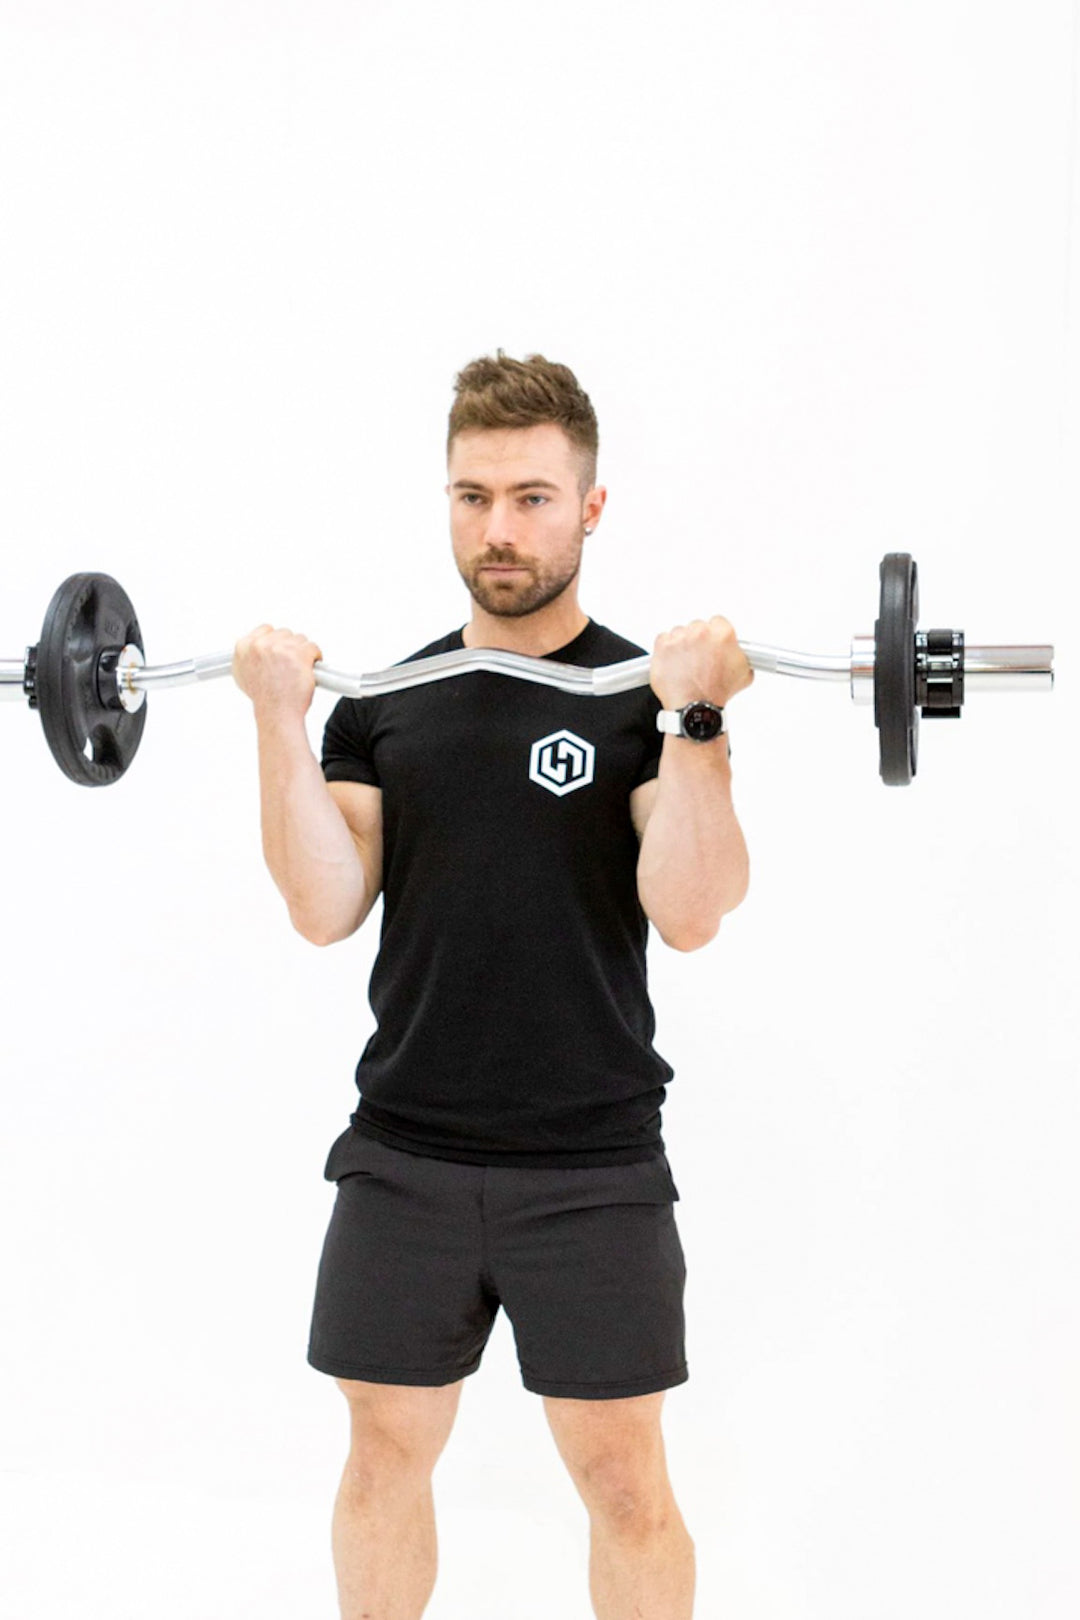 Man performing bicep curls with silver ez curl bar and black weight plates